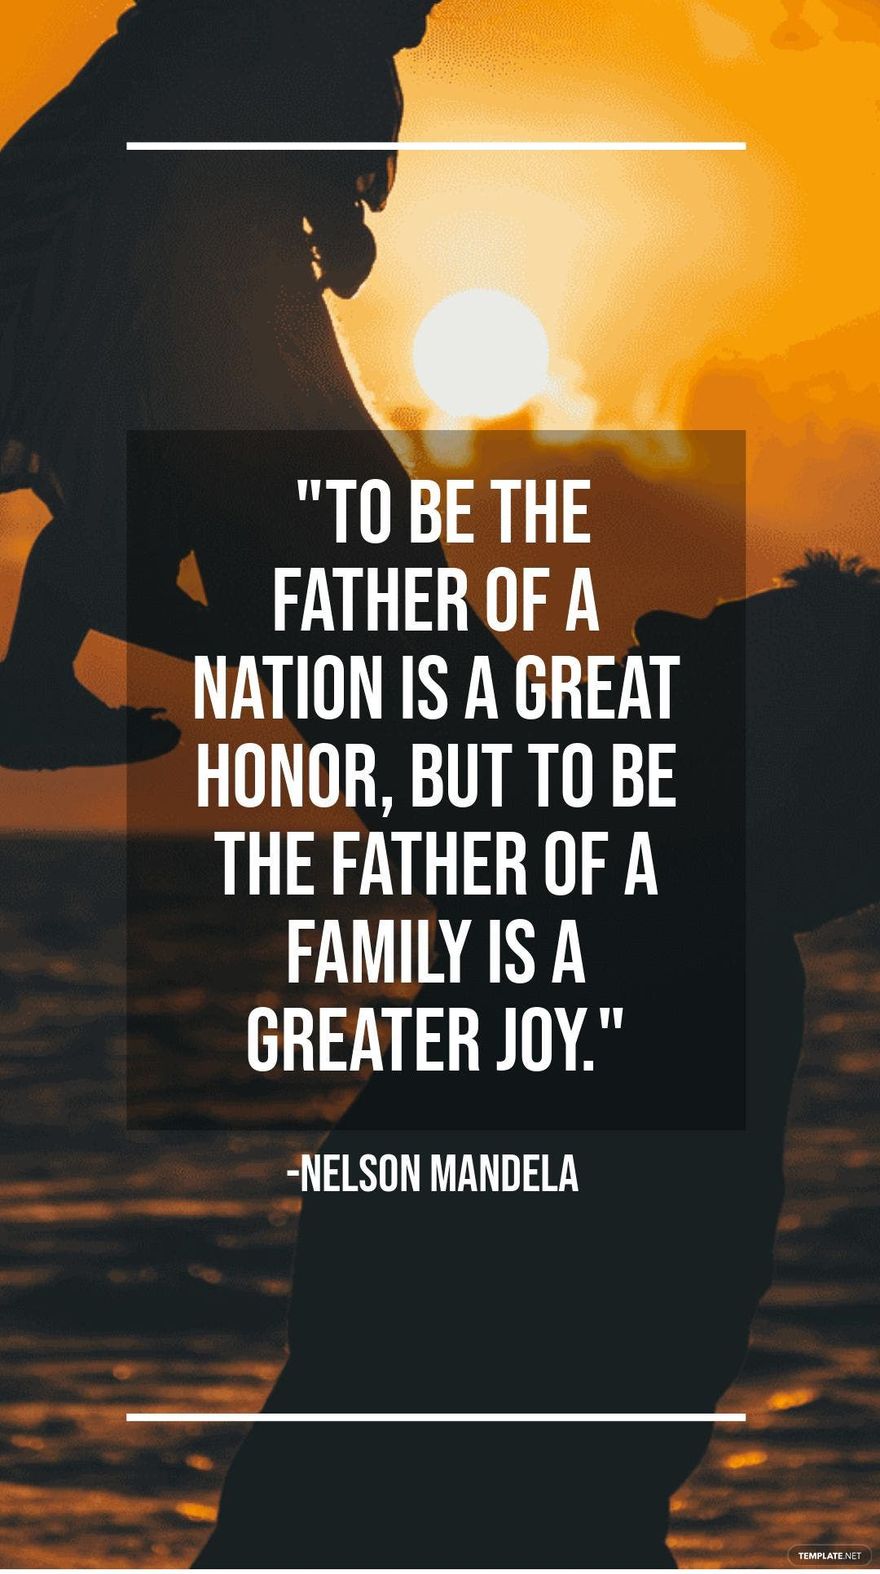 Nelson Mandela - "To be the father of a nation is a great honor, but to be the father of a family is a greater joy." in JPG